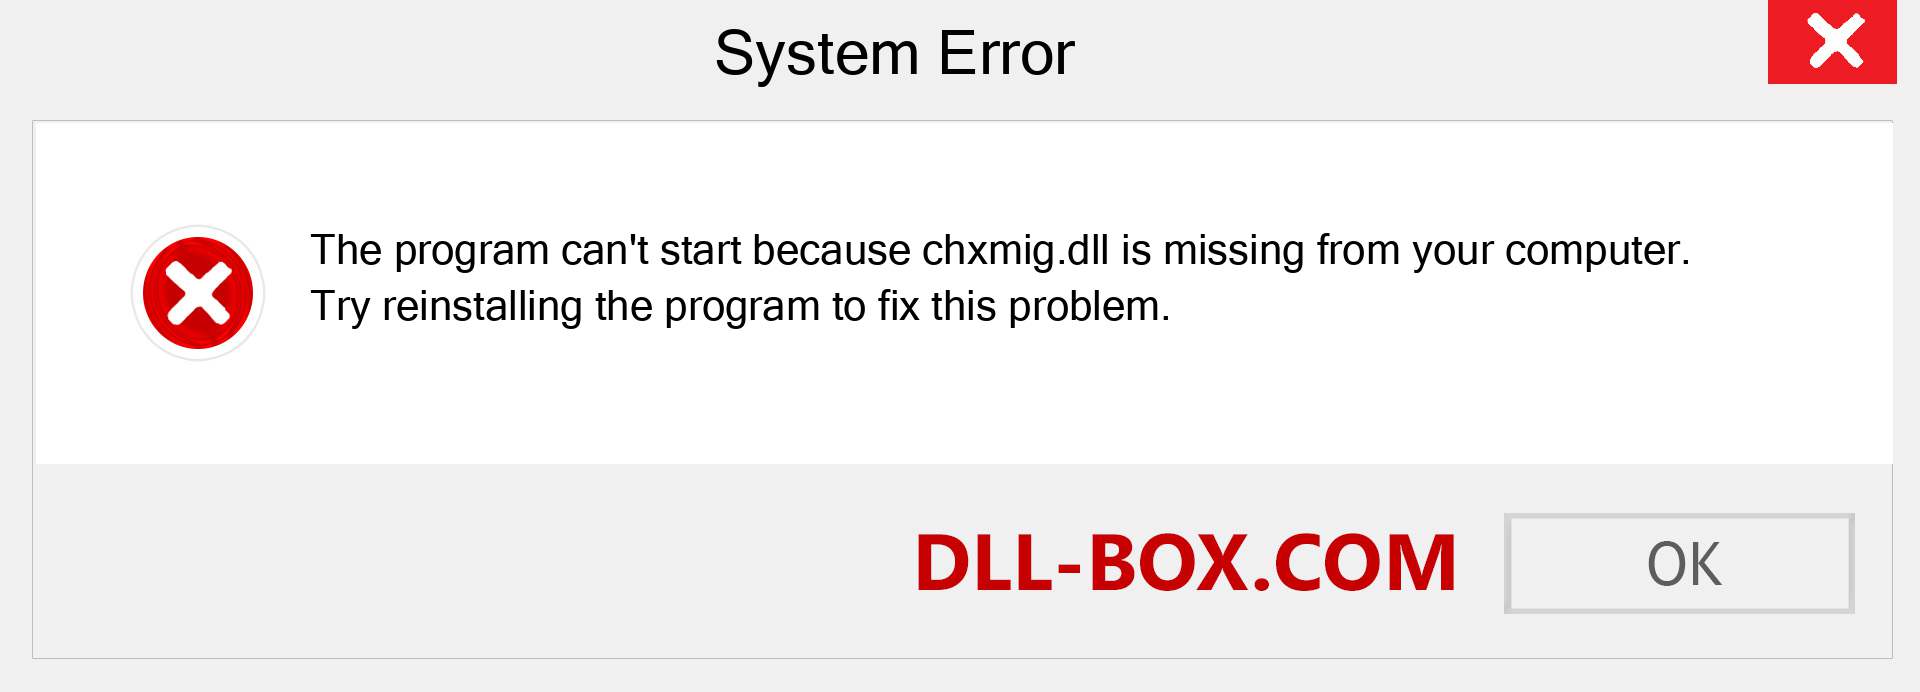  chxmig.dll file is missing?. Download for Windows 7, 8, 10 - Fix  chxmig dll Missing Error on Windows, photos, images